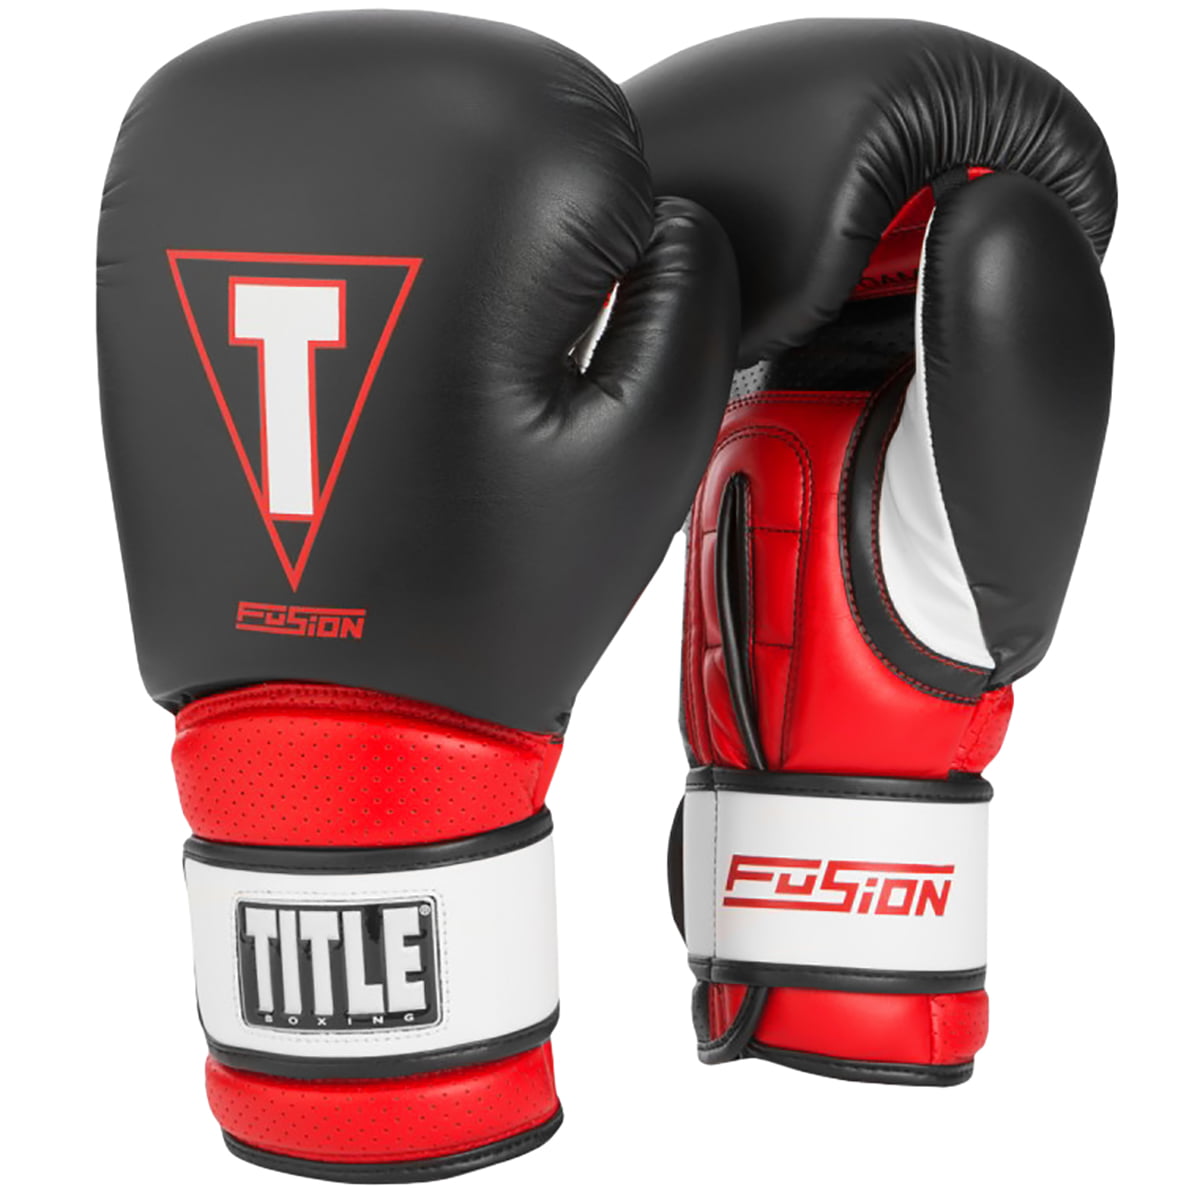 Black/Red 14oz Large NEW Title Boxing Classic Training Boxing Gloves 